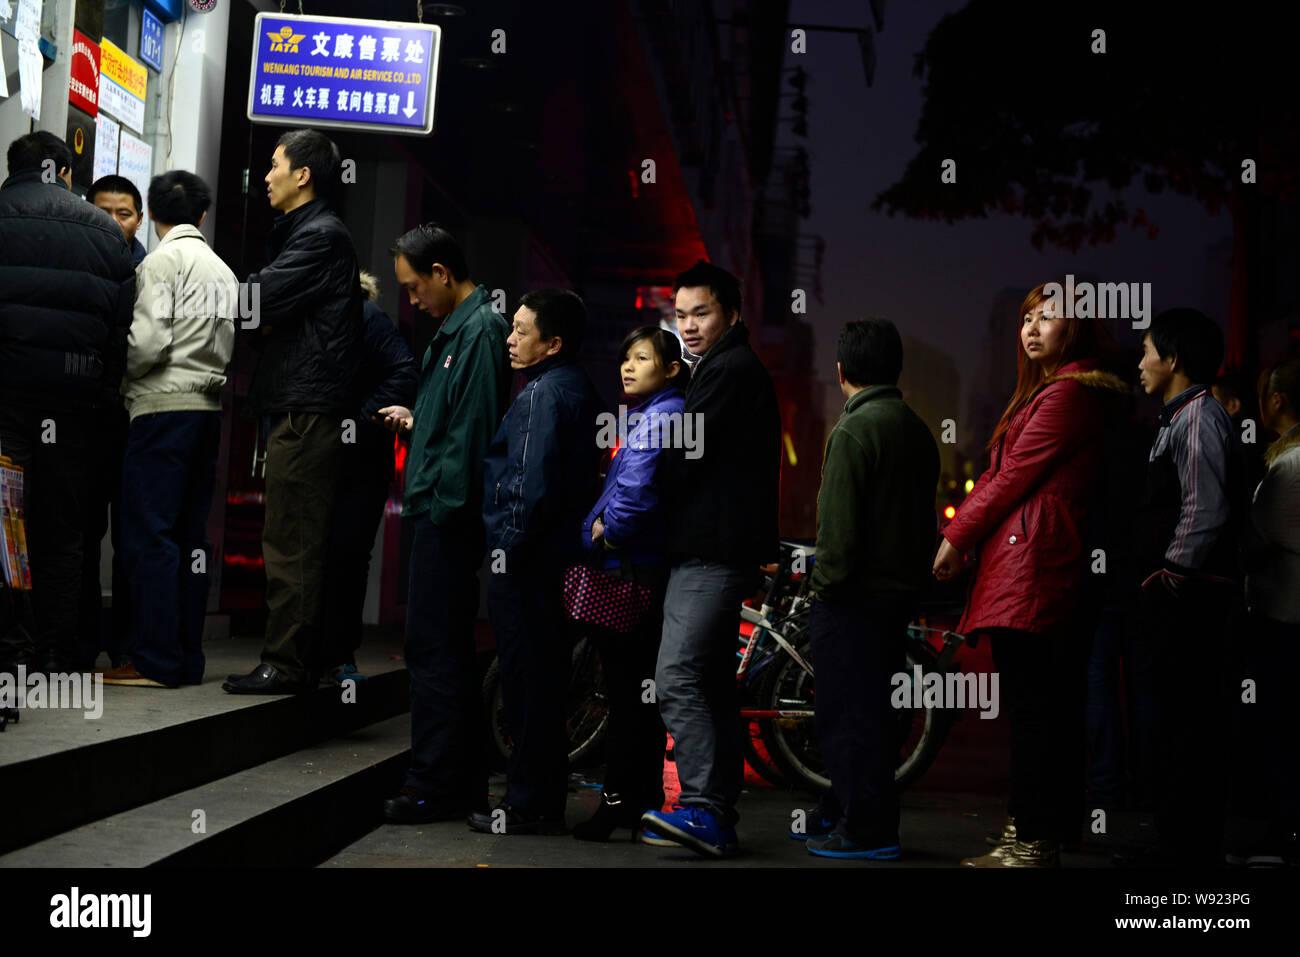 --FILE--Migrant workers queue up to buy train tickets in group over night at a ticket sales point in Dongguan city, southeast Chinas Guangdong provinc Stock Photo